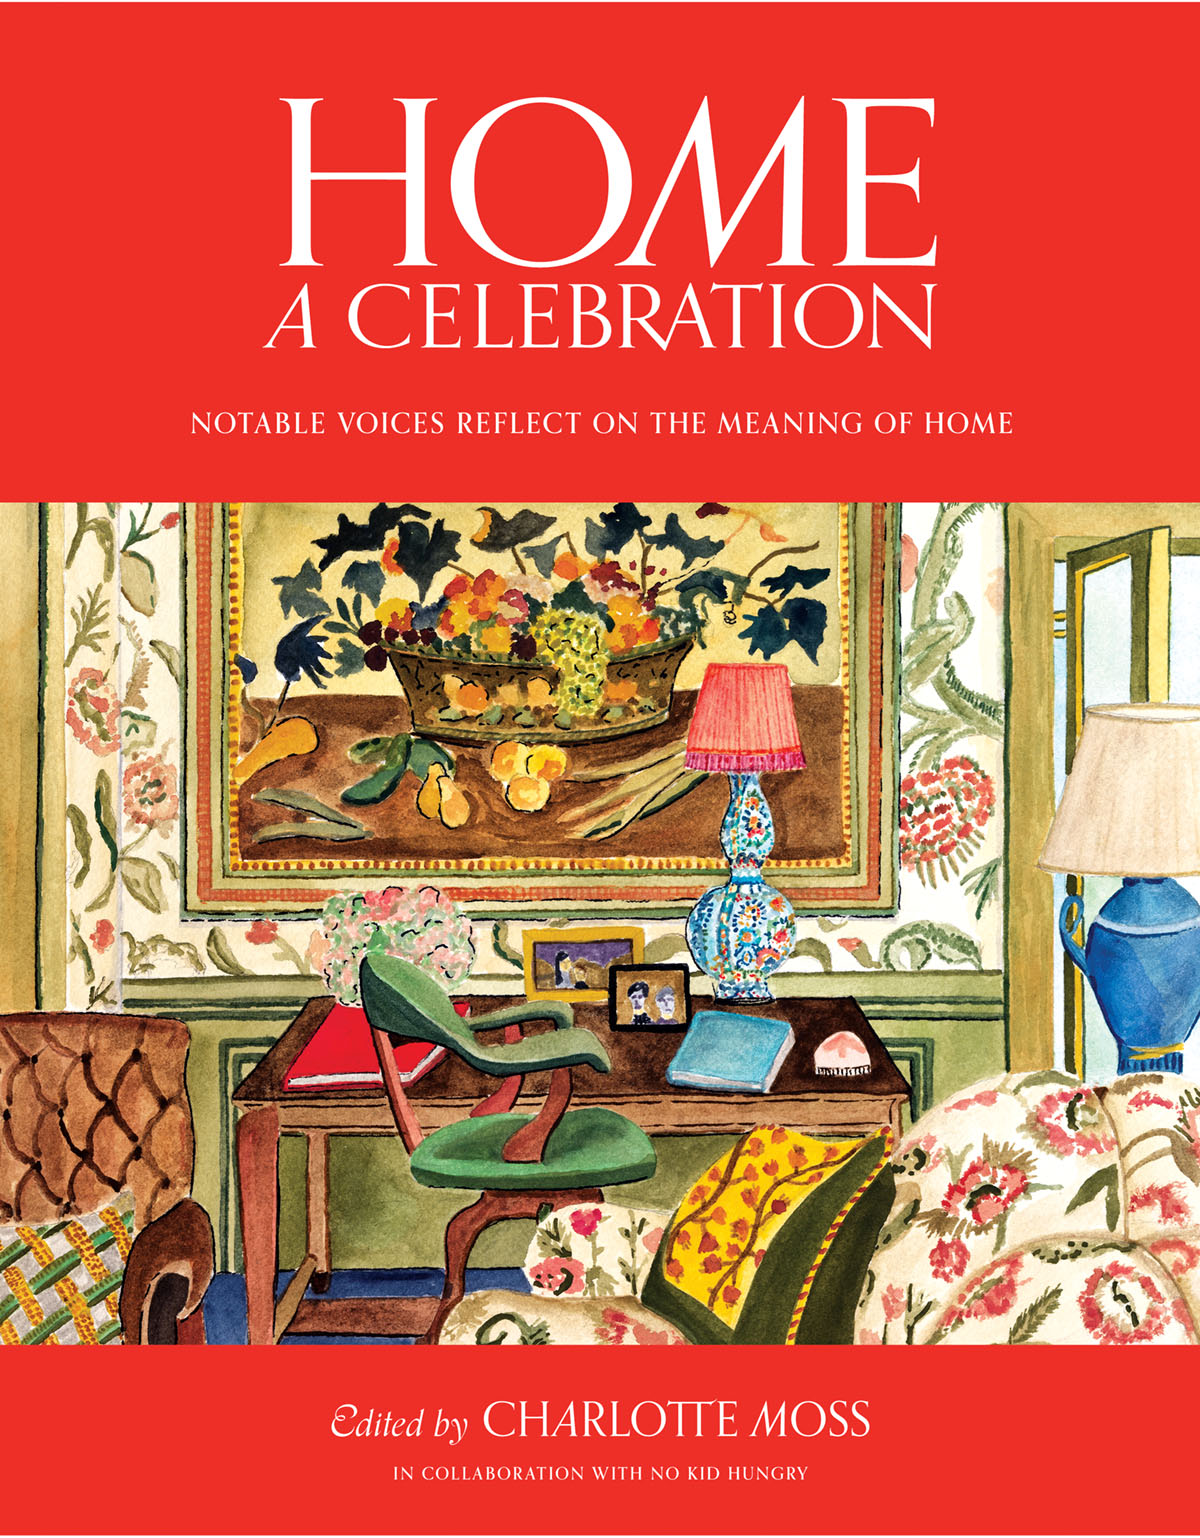 book cover: Home: A Celebration, edited by Charlotte Moss, in collaboration with No Kid Hungry (Rizzoli New York, 2021)